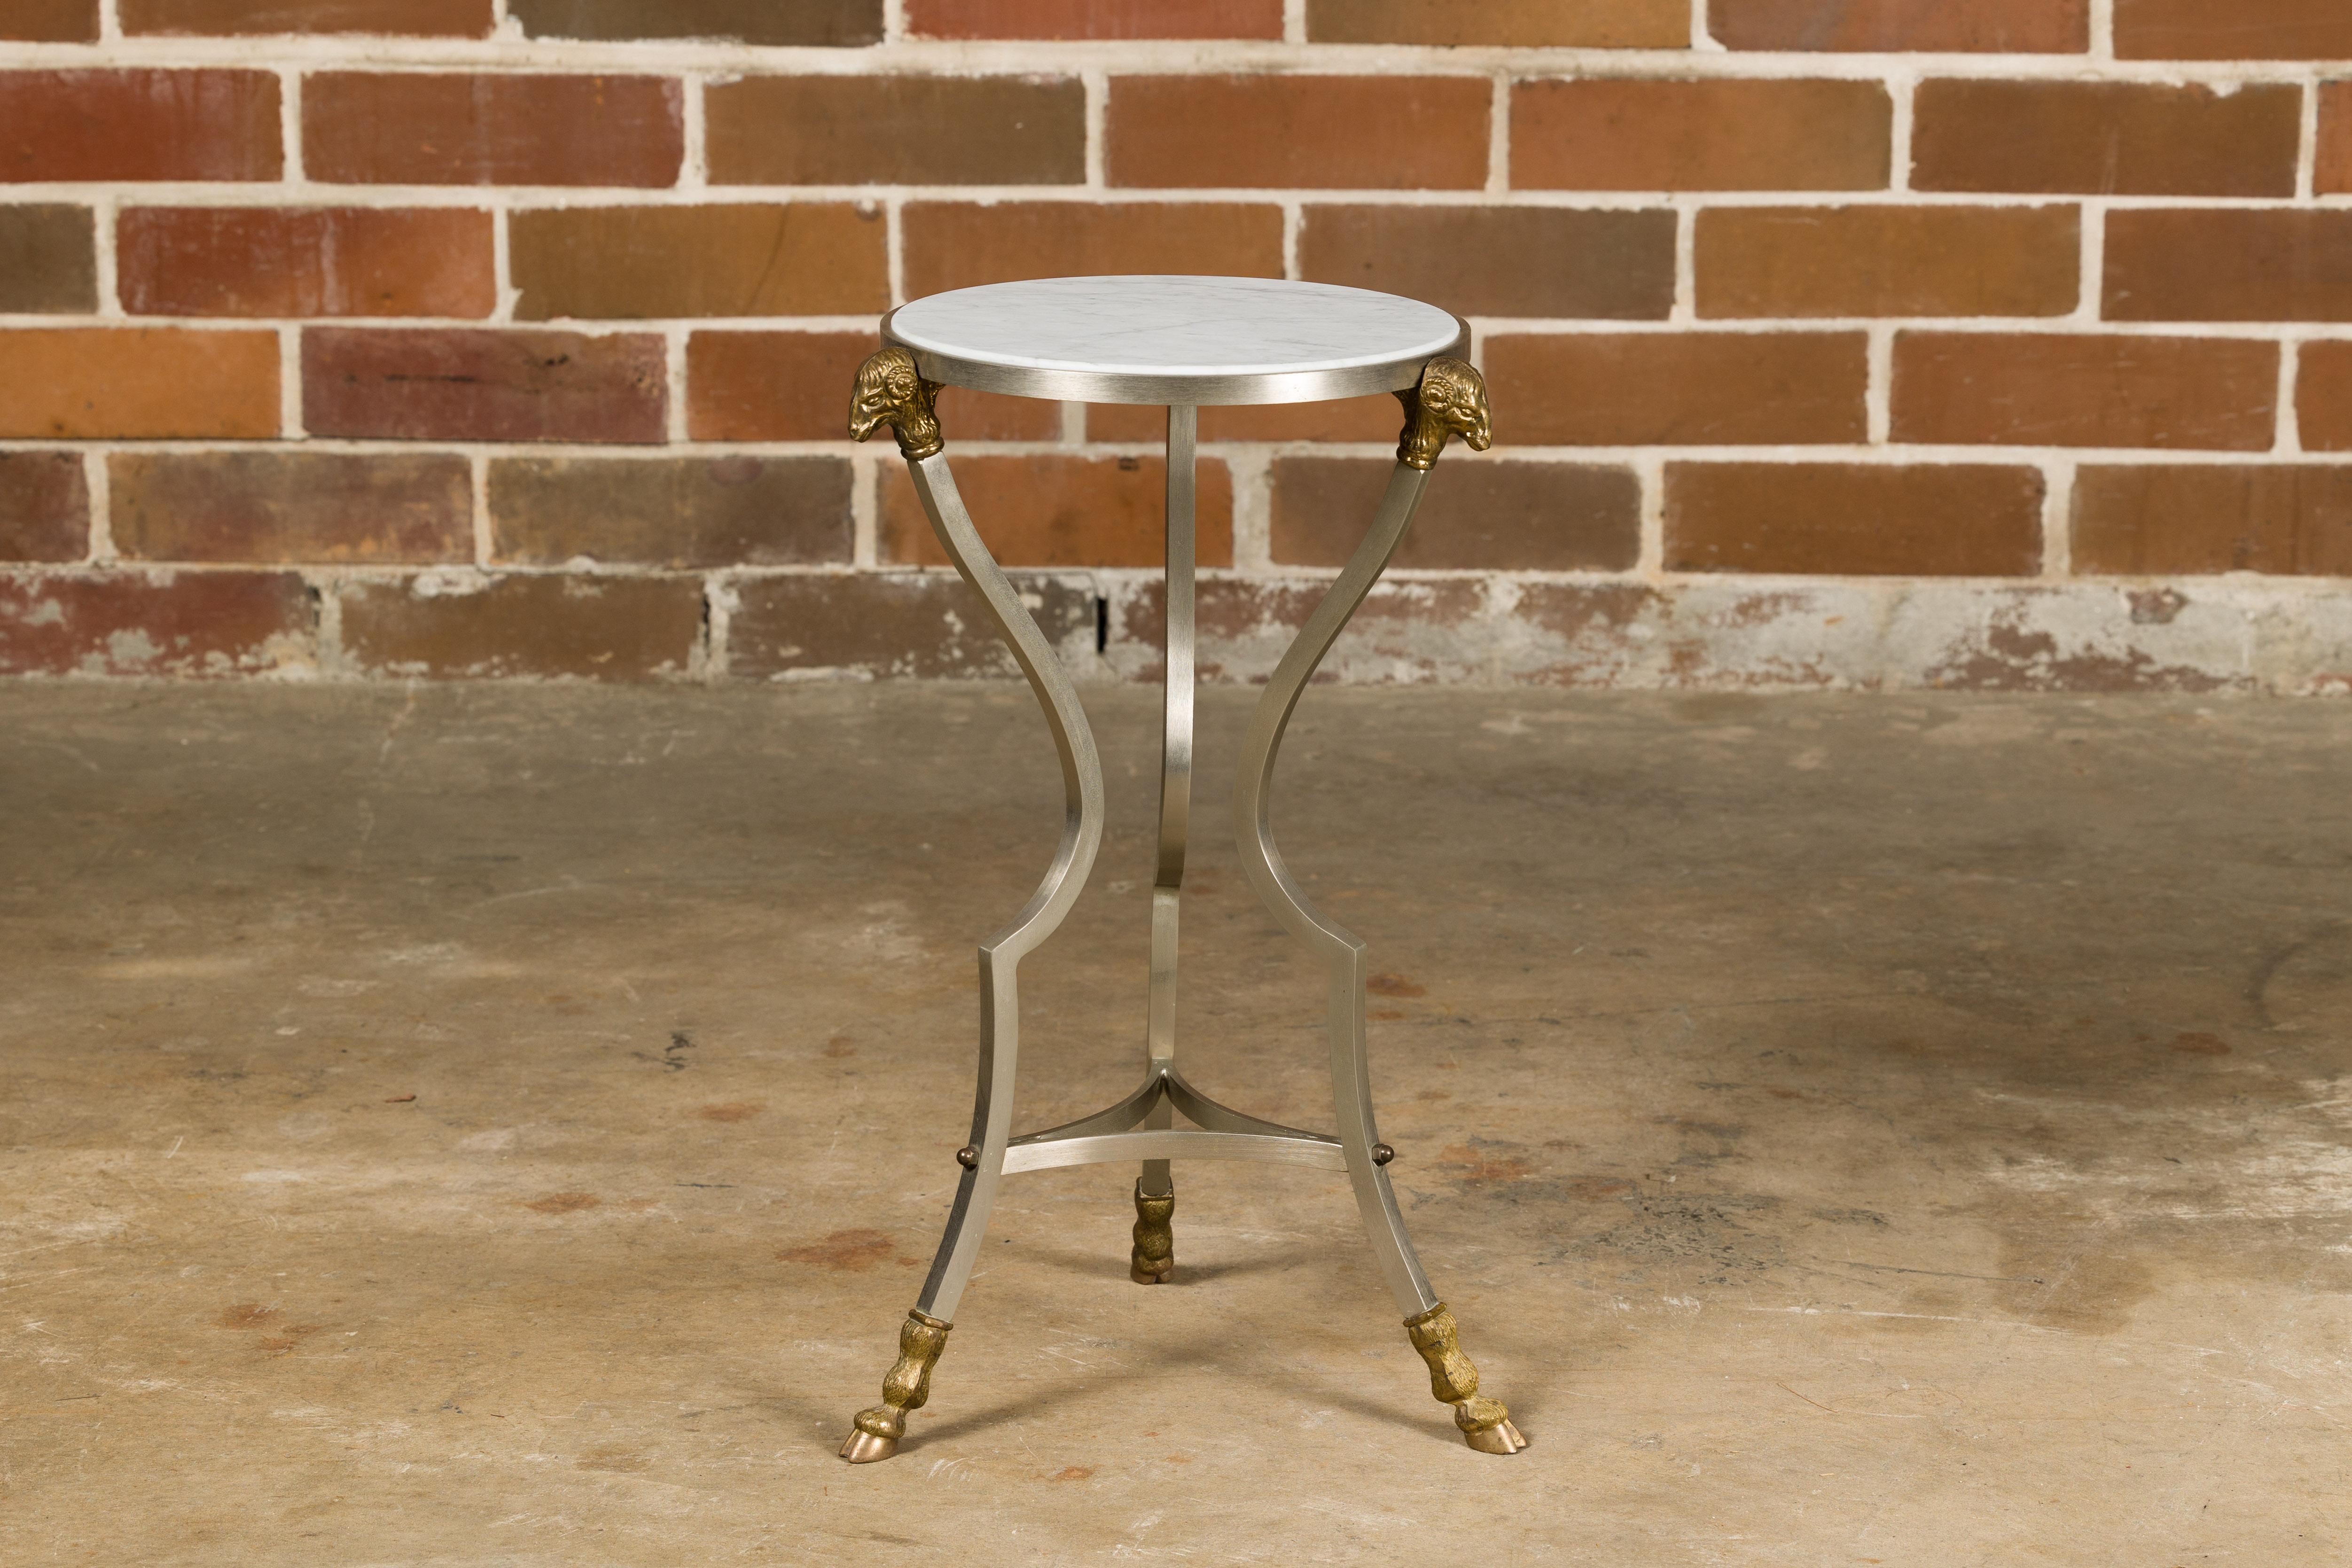 An Italian Midcentury steel side table with brass rams heads, hoofed feet and white marble top. This Italian Midcentury steel side table is an epitome of elegance and artistry, merging the sleekness of steel with the opulence of brass and marble.